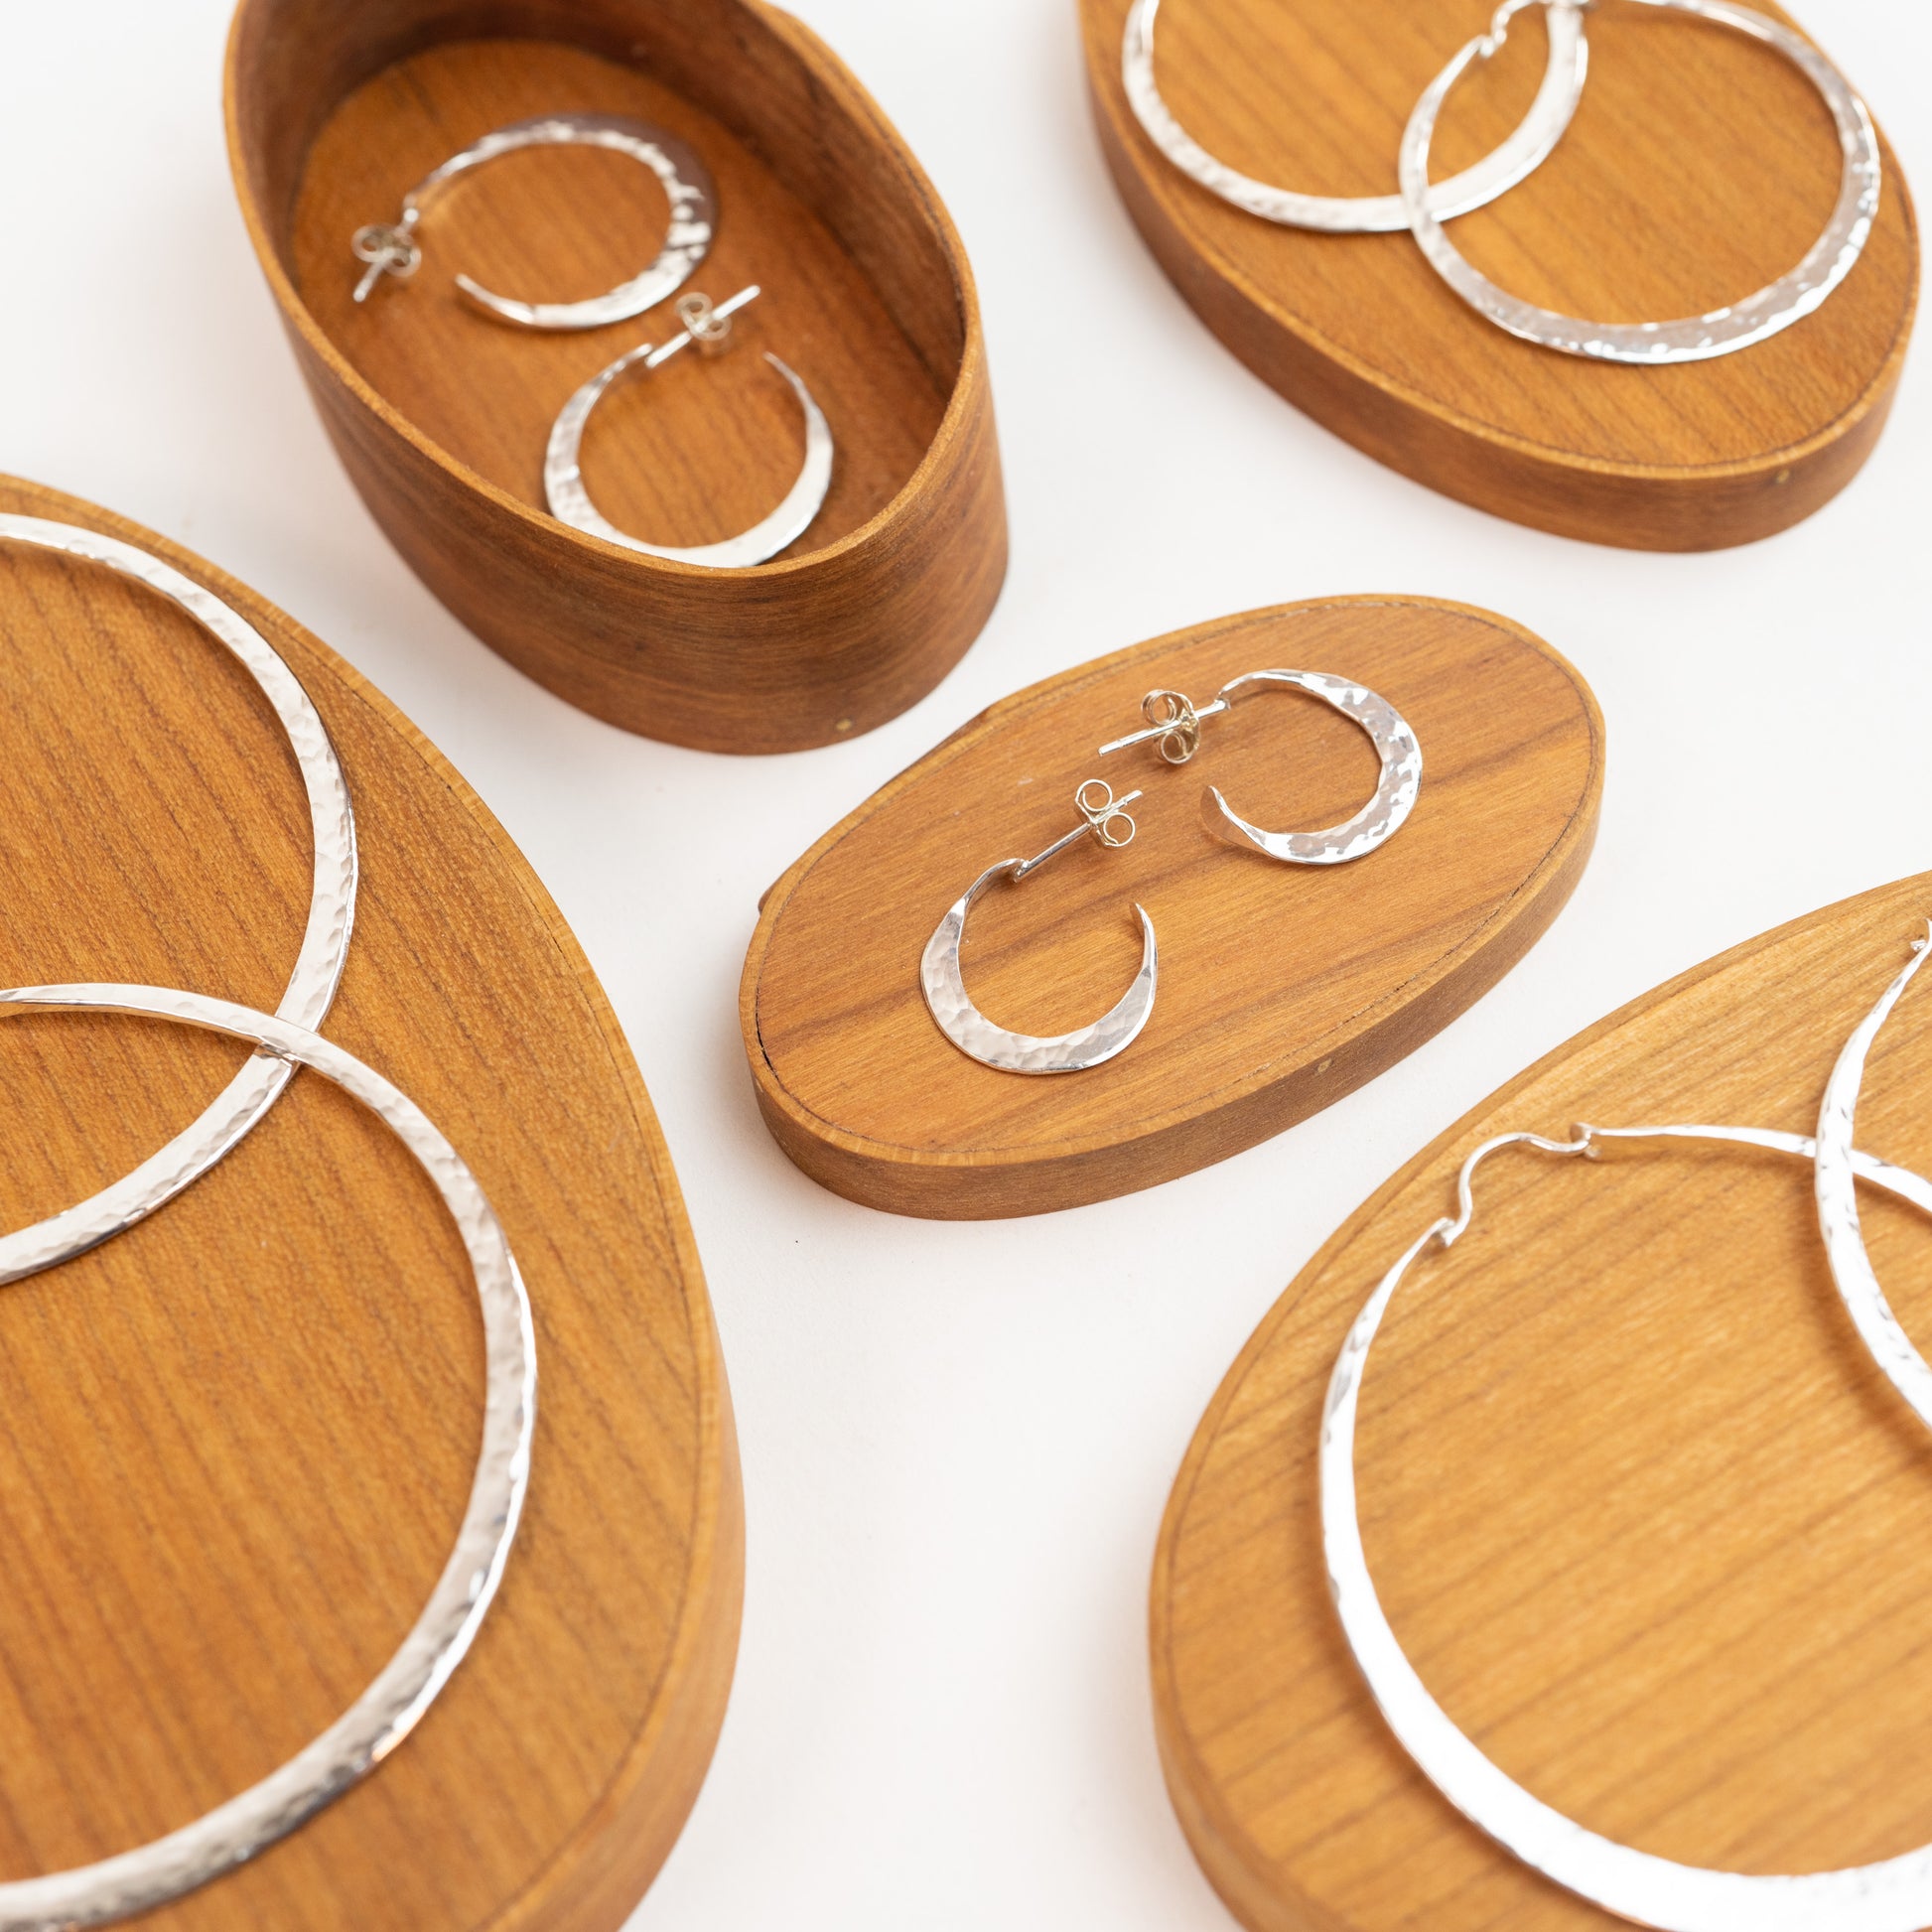 Hoop earrings in Sterling Silver XS and Large with post - 3 inch Heavy - 2 1/4 inch Large - 1 5/8 inch Medium